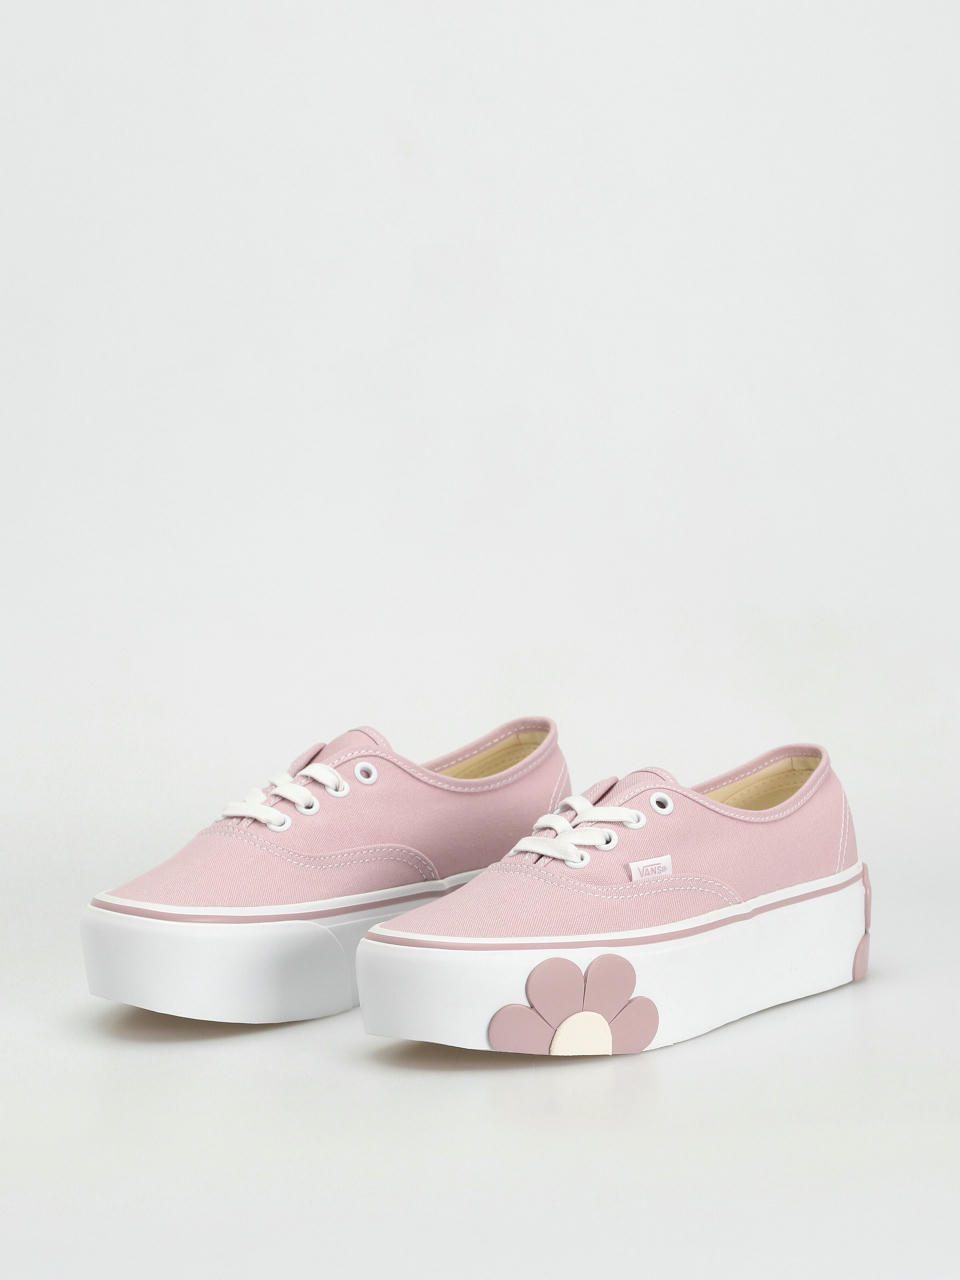 Vans Authentic Stackform Osf Shoes Wmn (keepsake lilac)